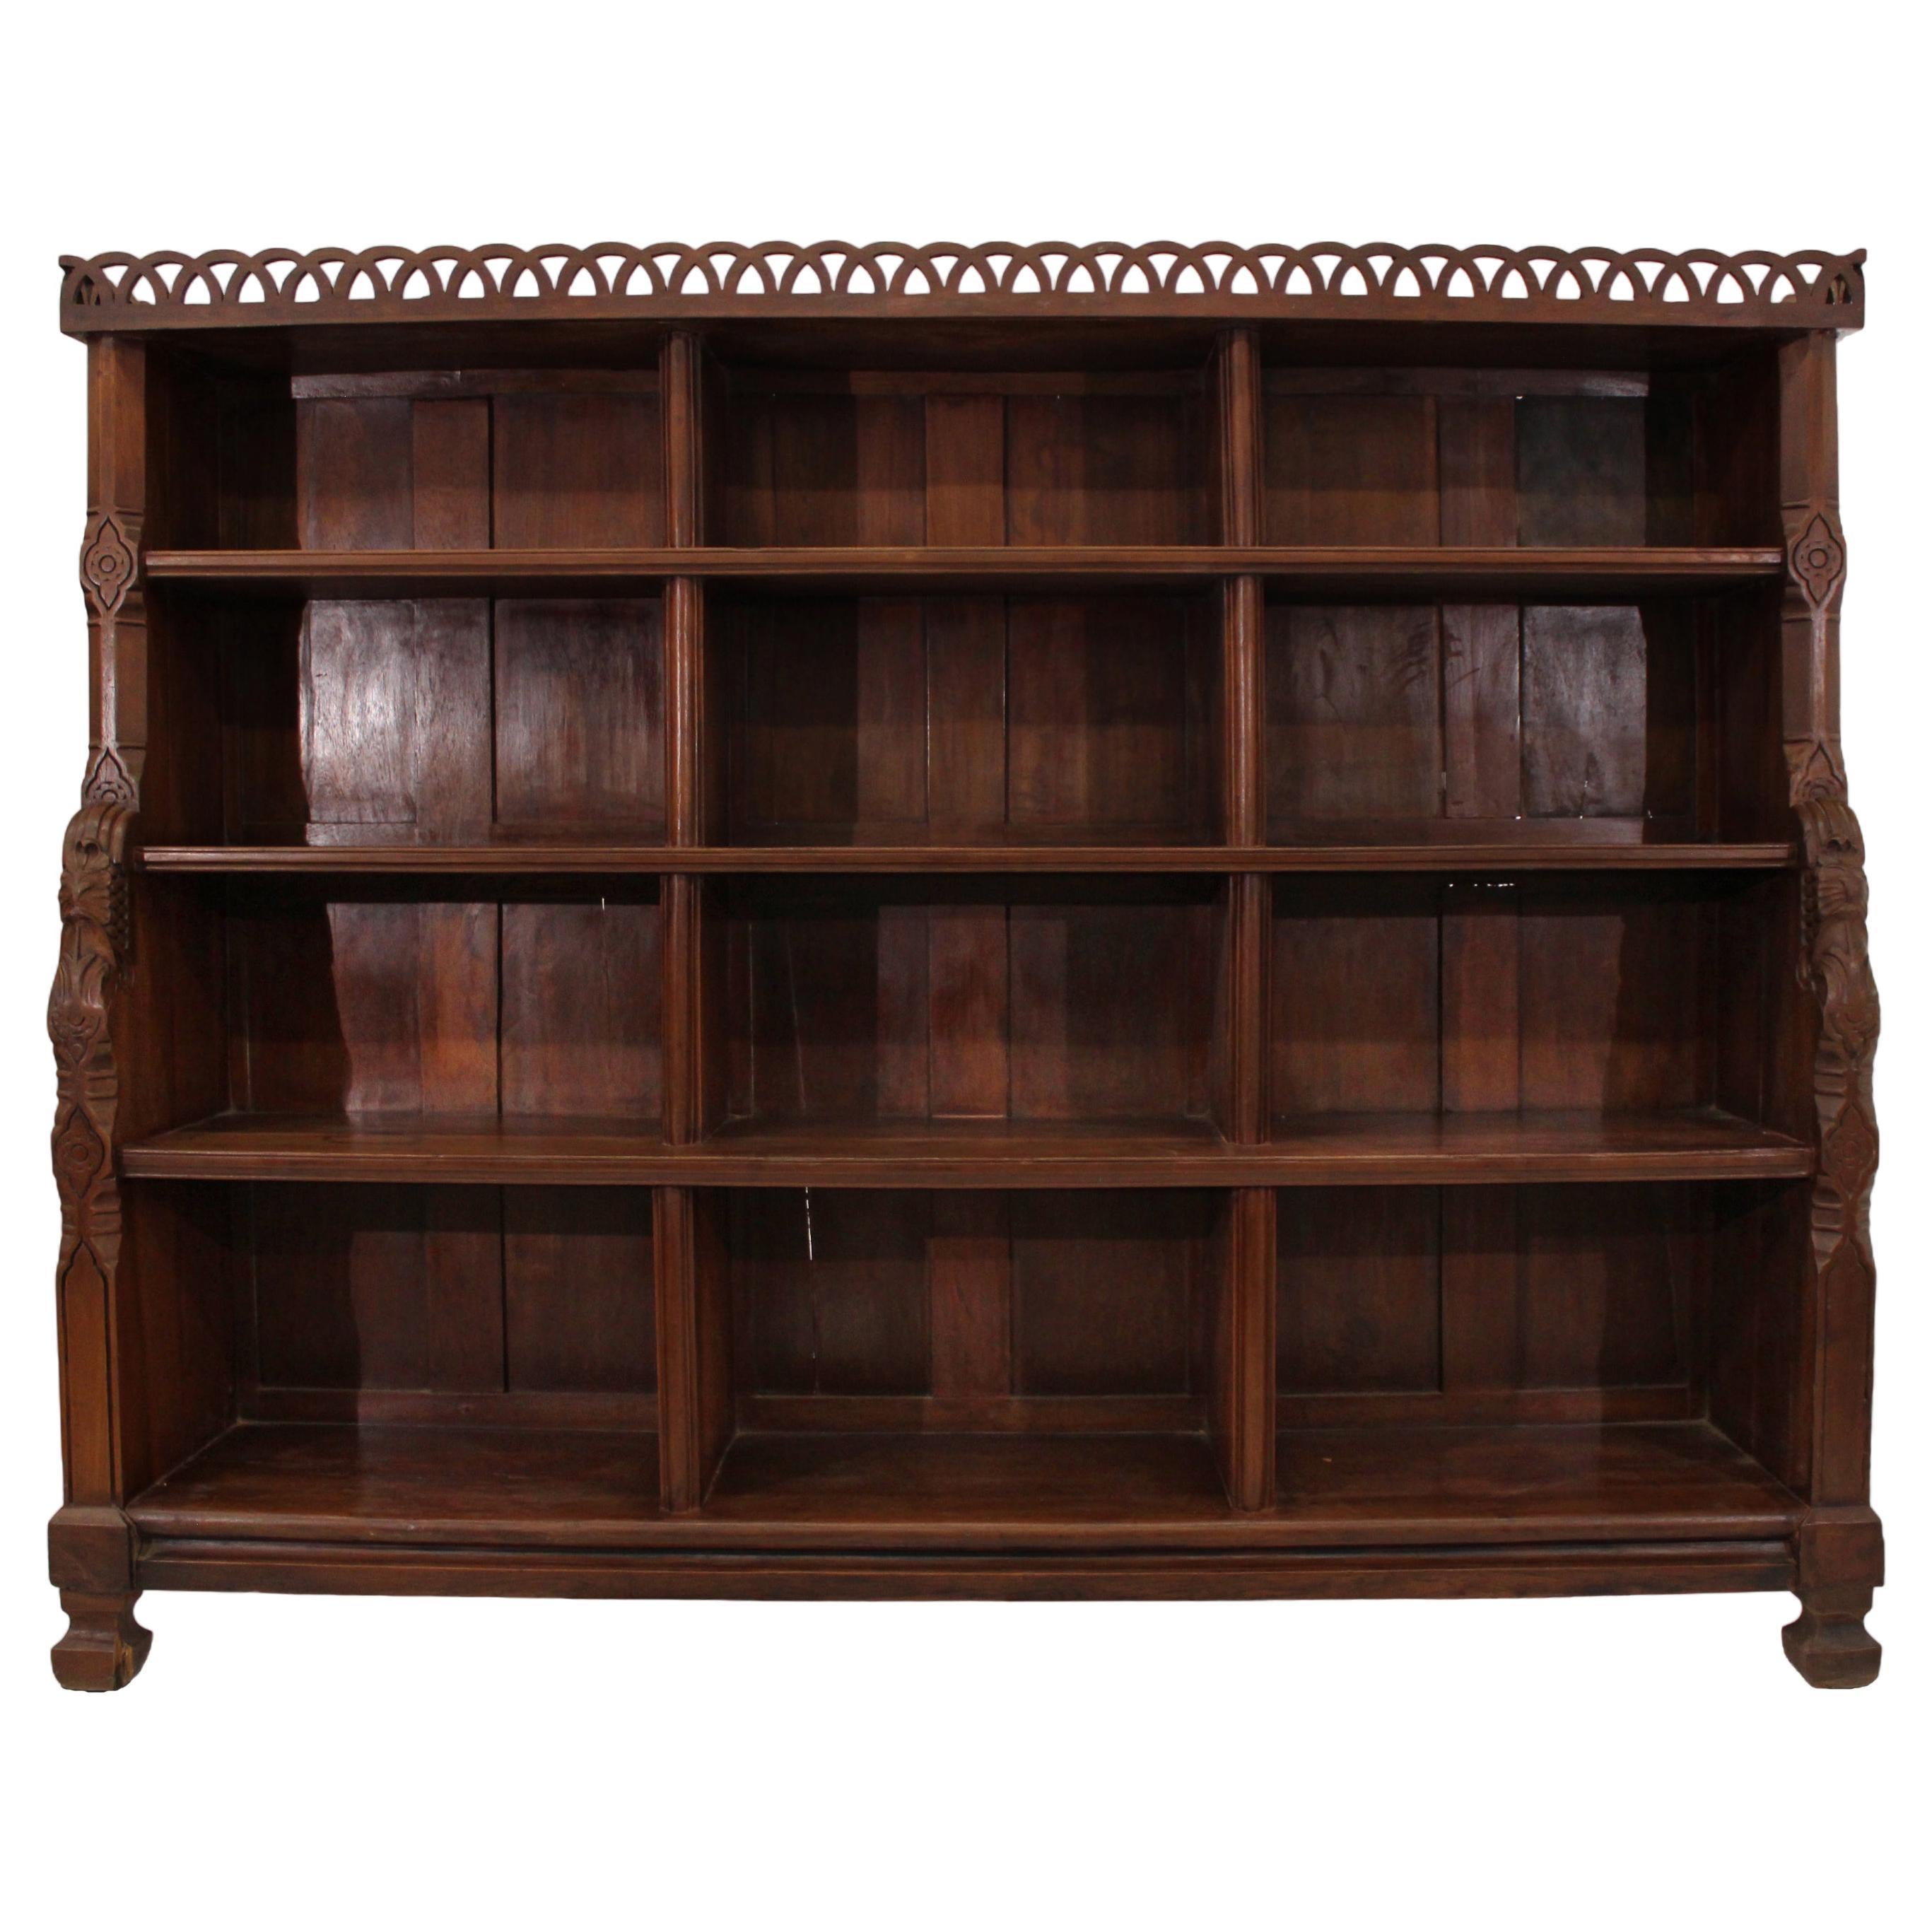 Teak Bookcase From an Indian Palace